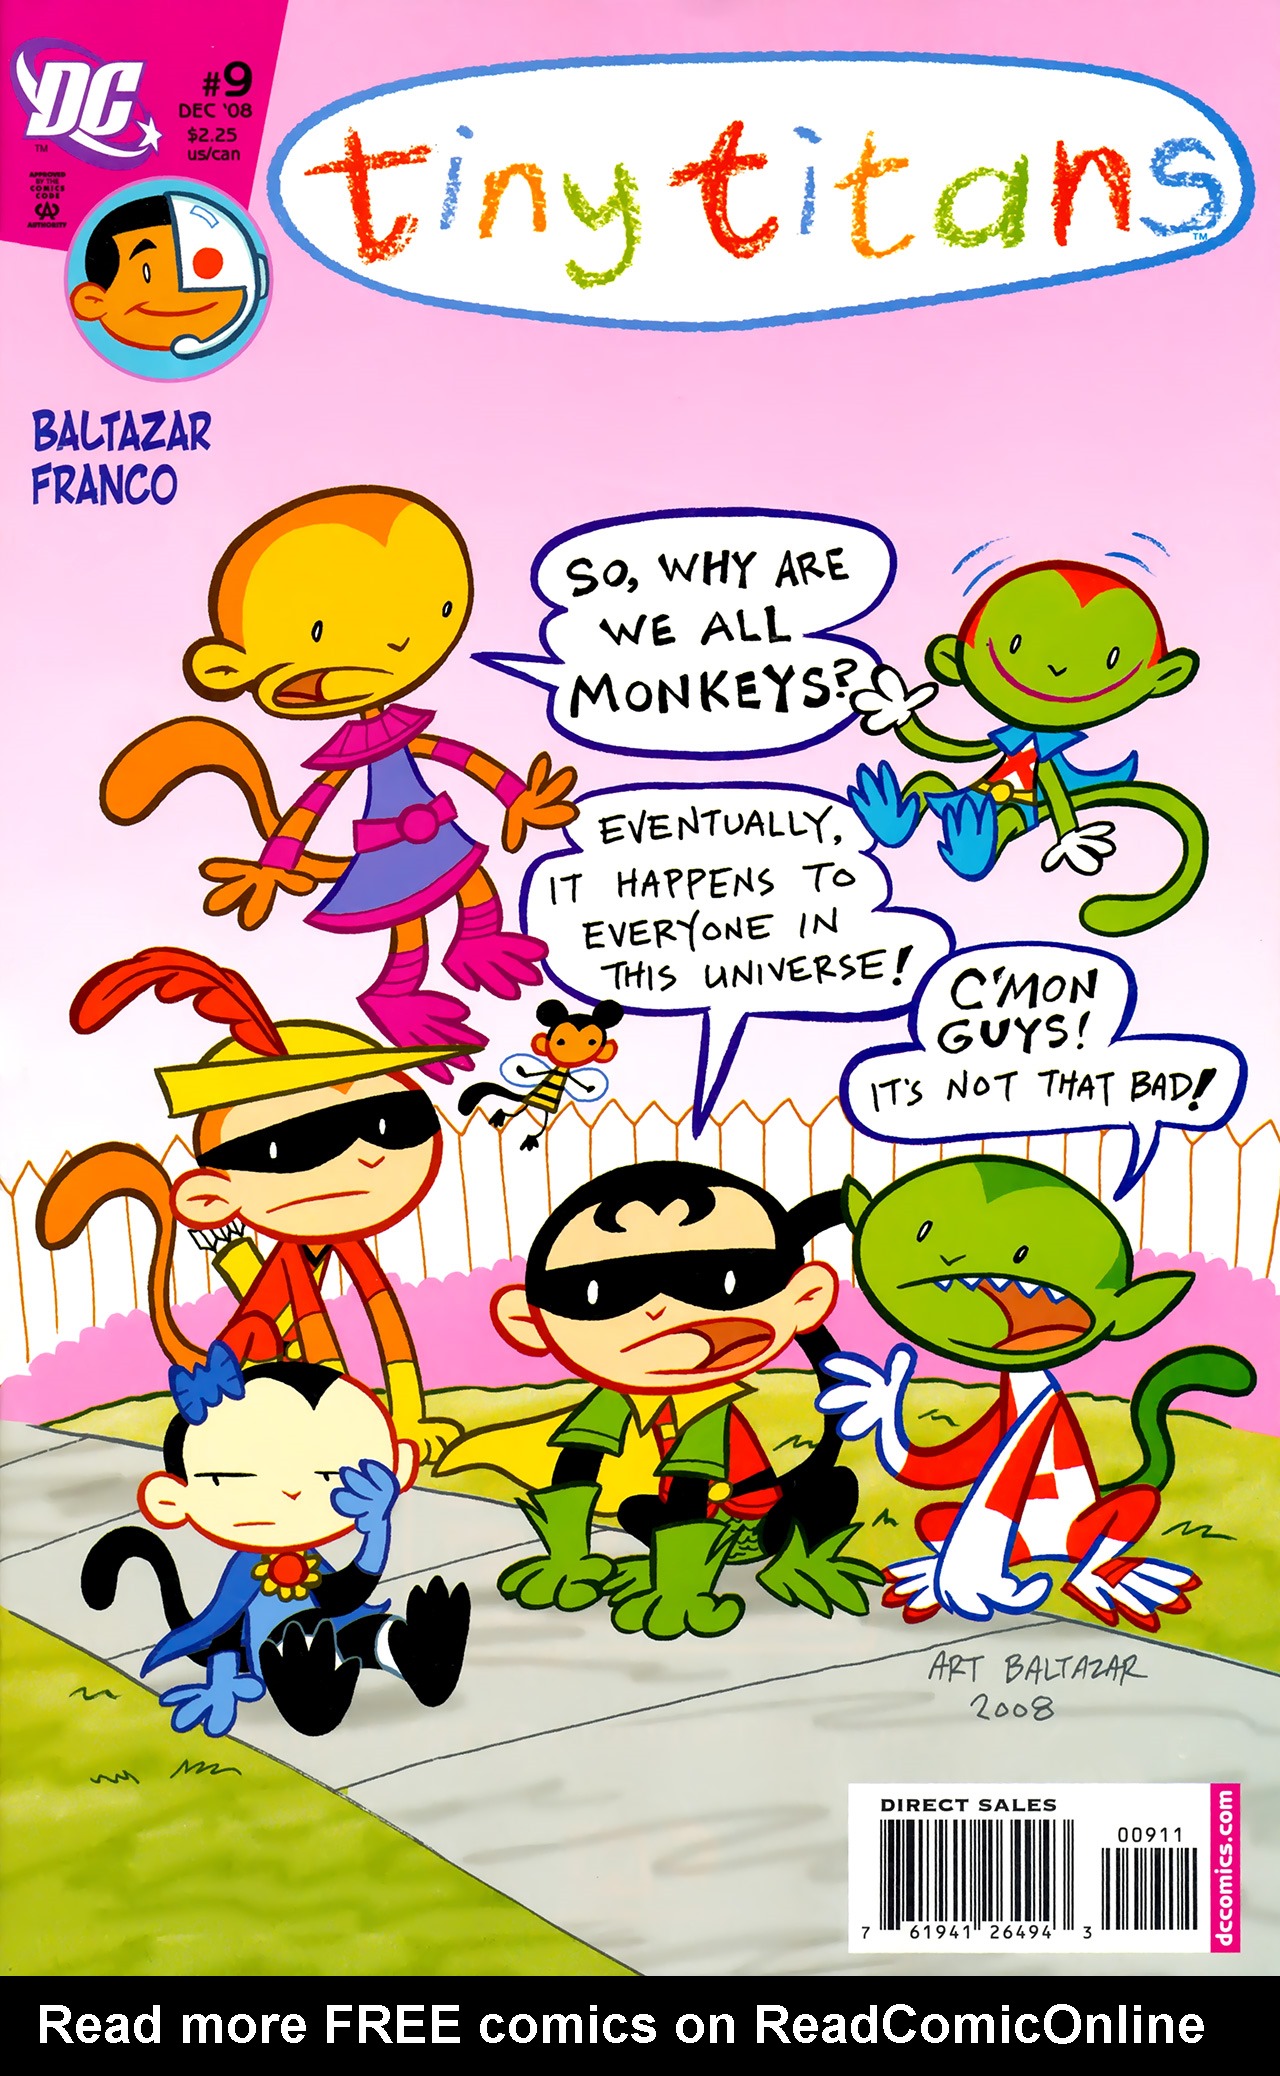 Tiny Titans Issue 9 | Read Tiny Titans Issue 9 comic online in high  quality. Read Full Comic online for free - Read comics online in high  quality .| READ COMIC ONLINE